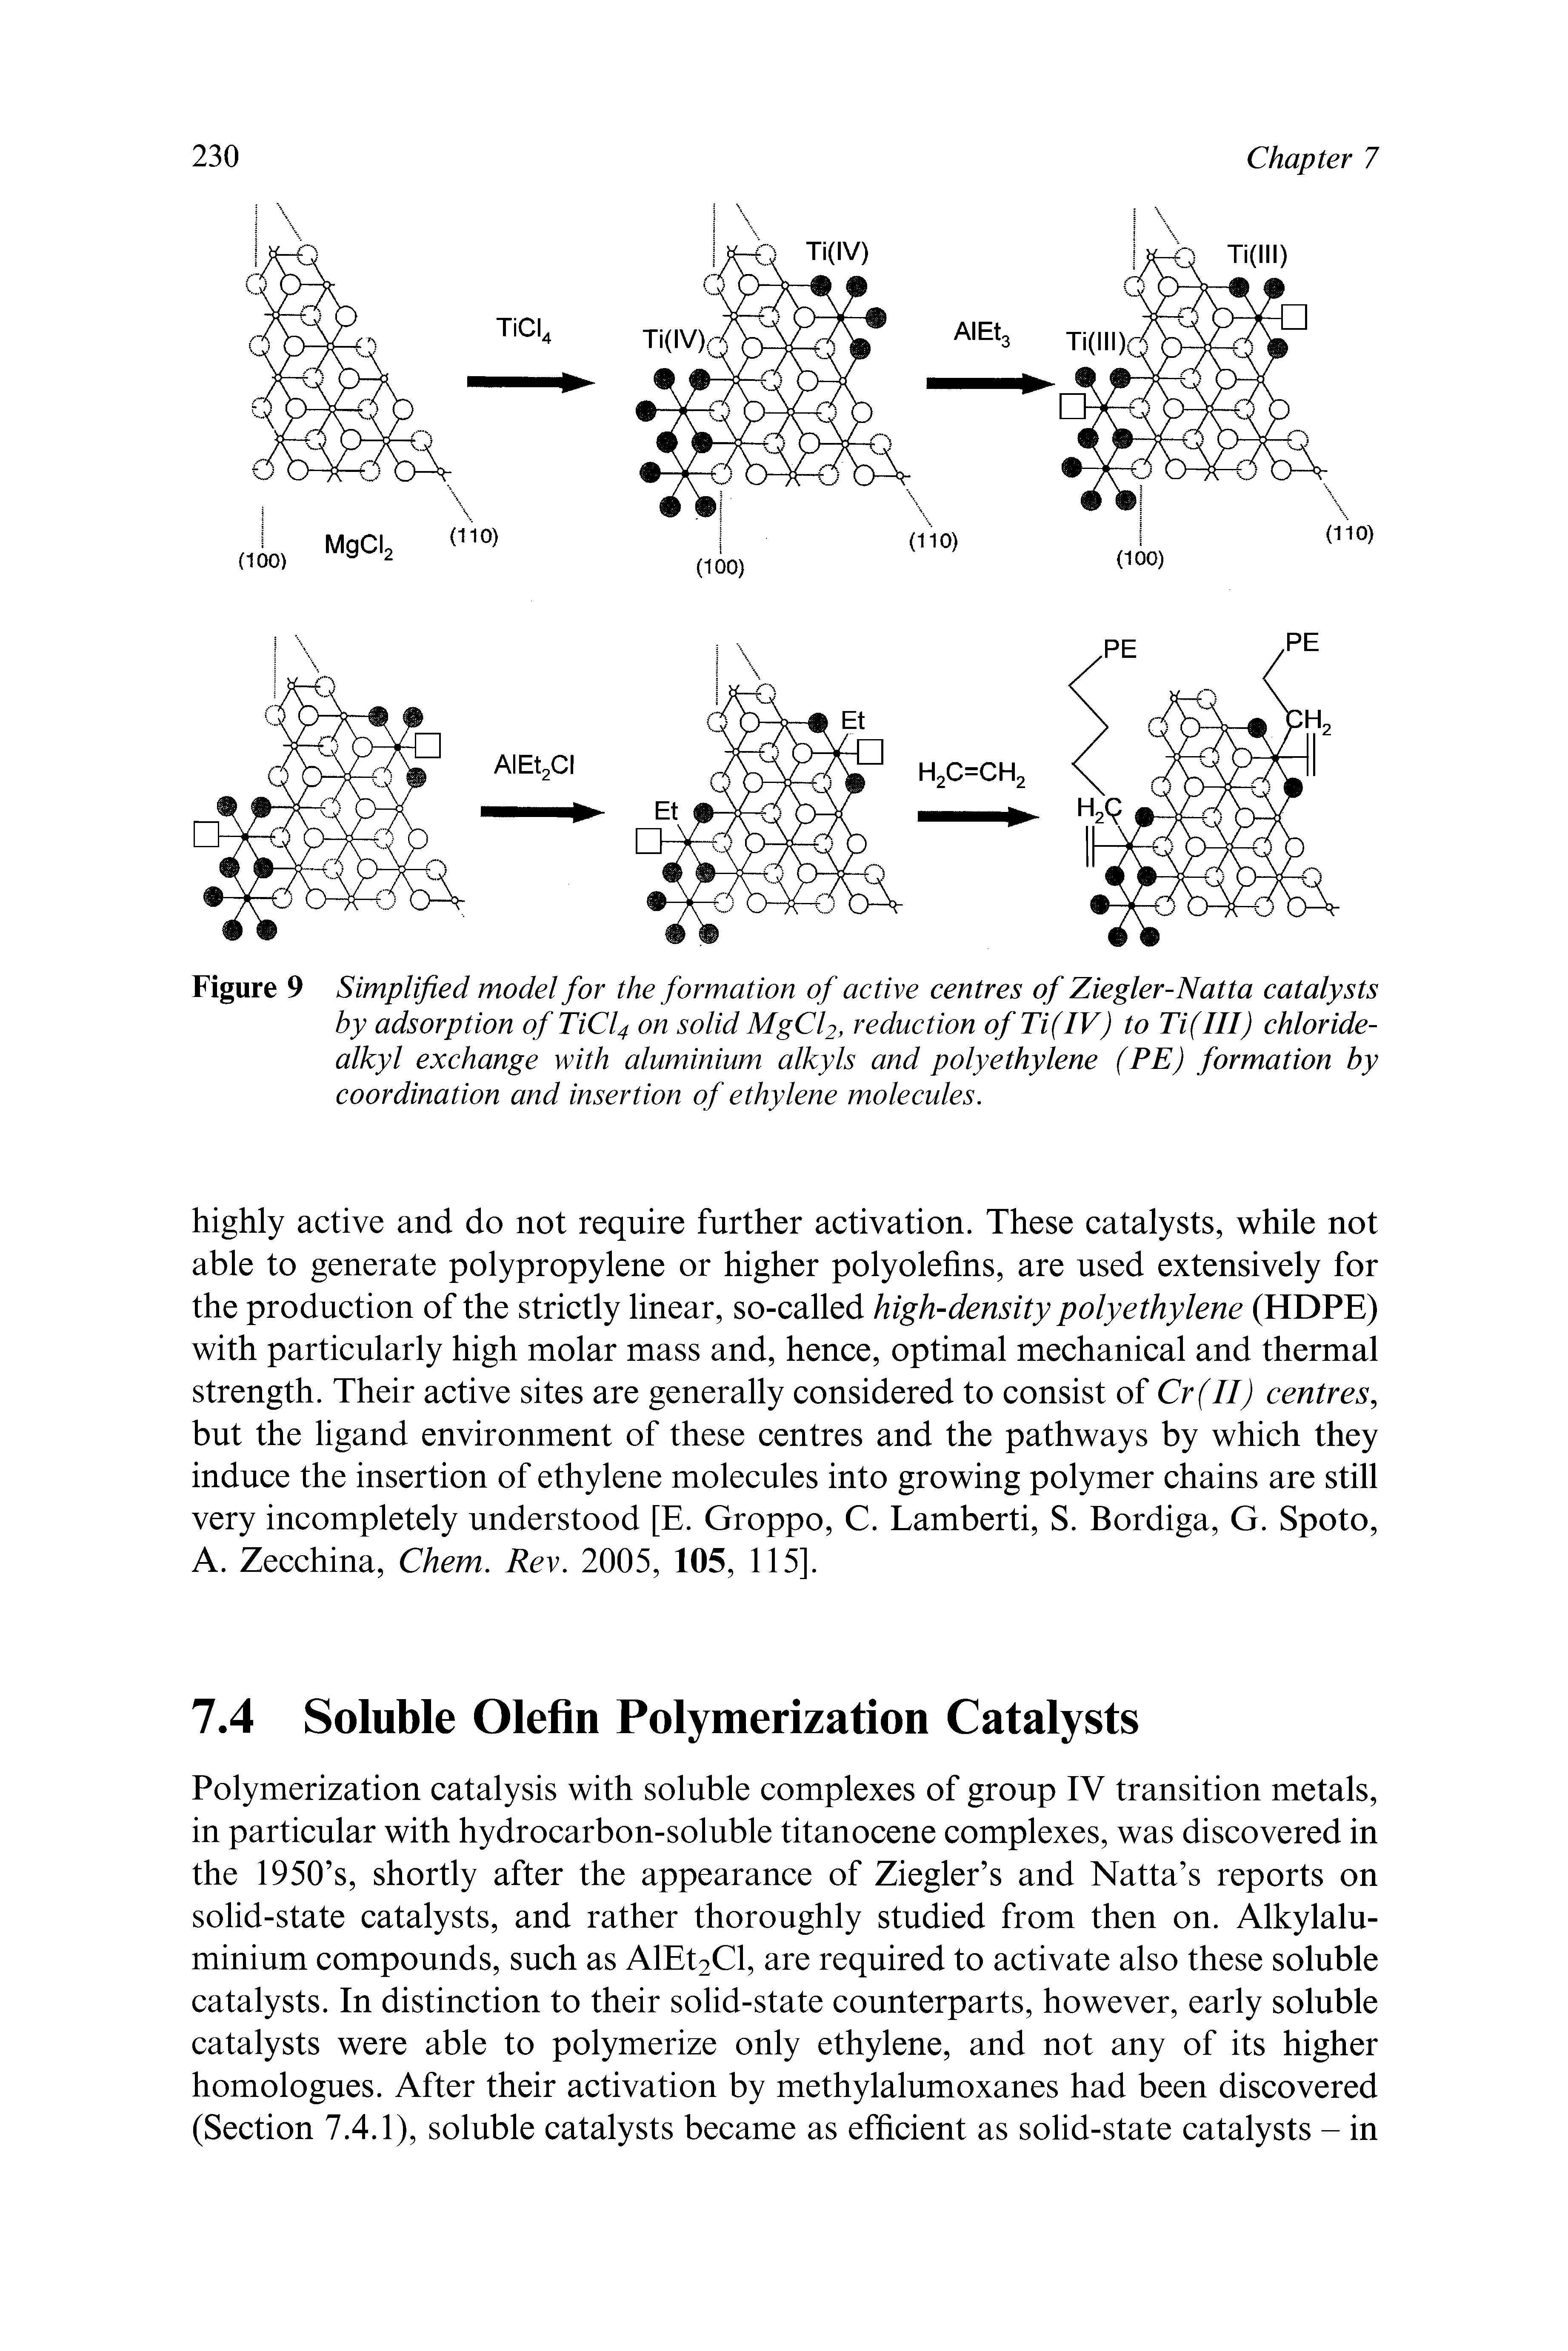 Figure 9 Simplified model for the formation of active centres of Ziegler-Natta catalysts by adsorption ofTiCl4 on solid MgCl2, reduction ofTi(IV) to Ti(III) chloride-alkyl exchange with aluminium alkyls and polyethylene (PE) formation by coordination and insertion of ethylene molecules.